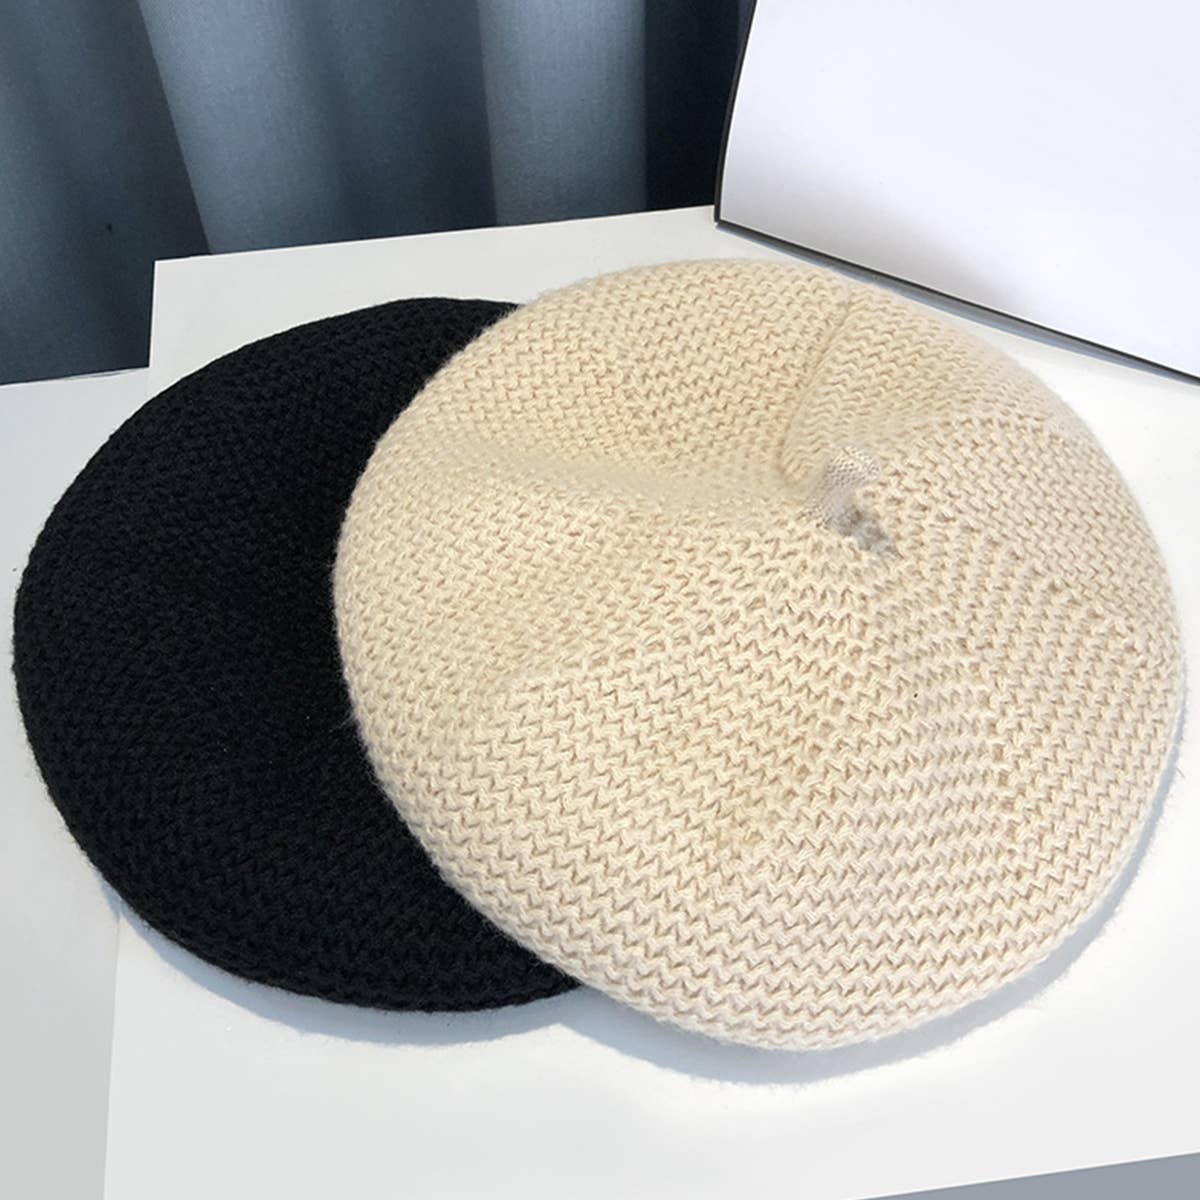 Knitted Beret